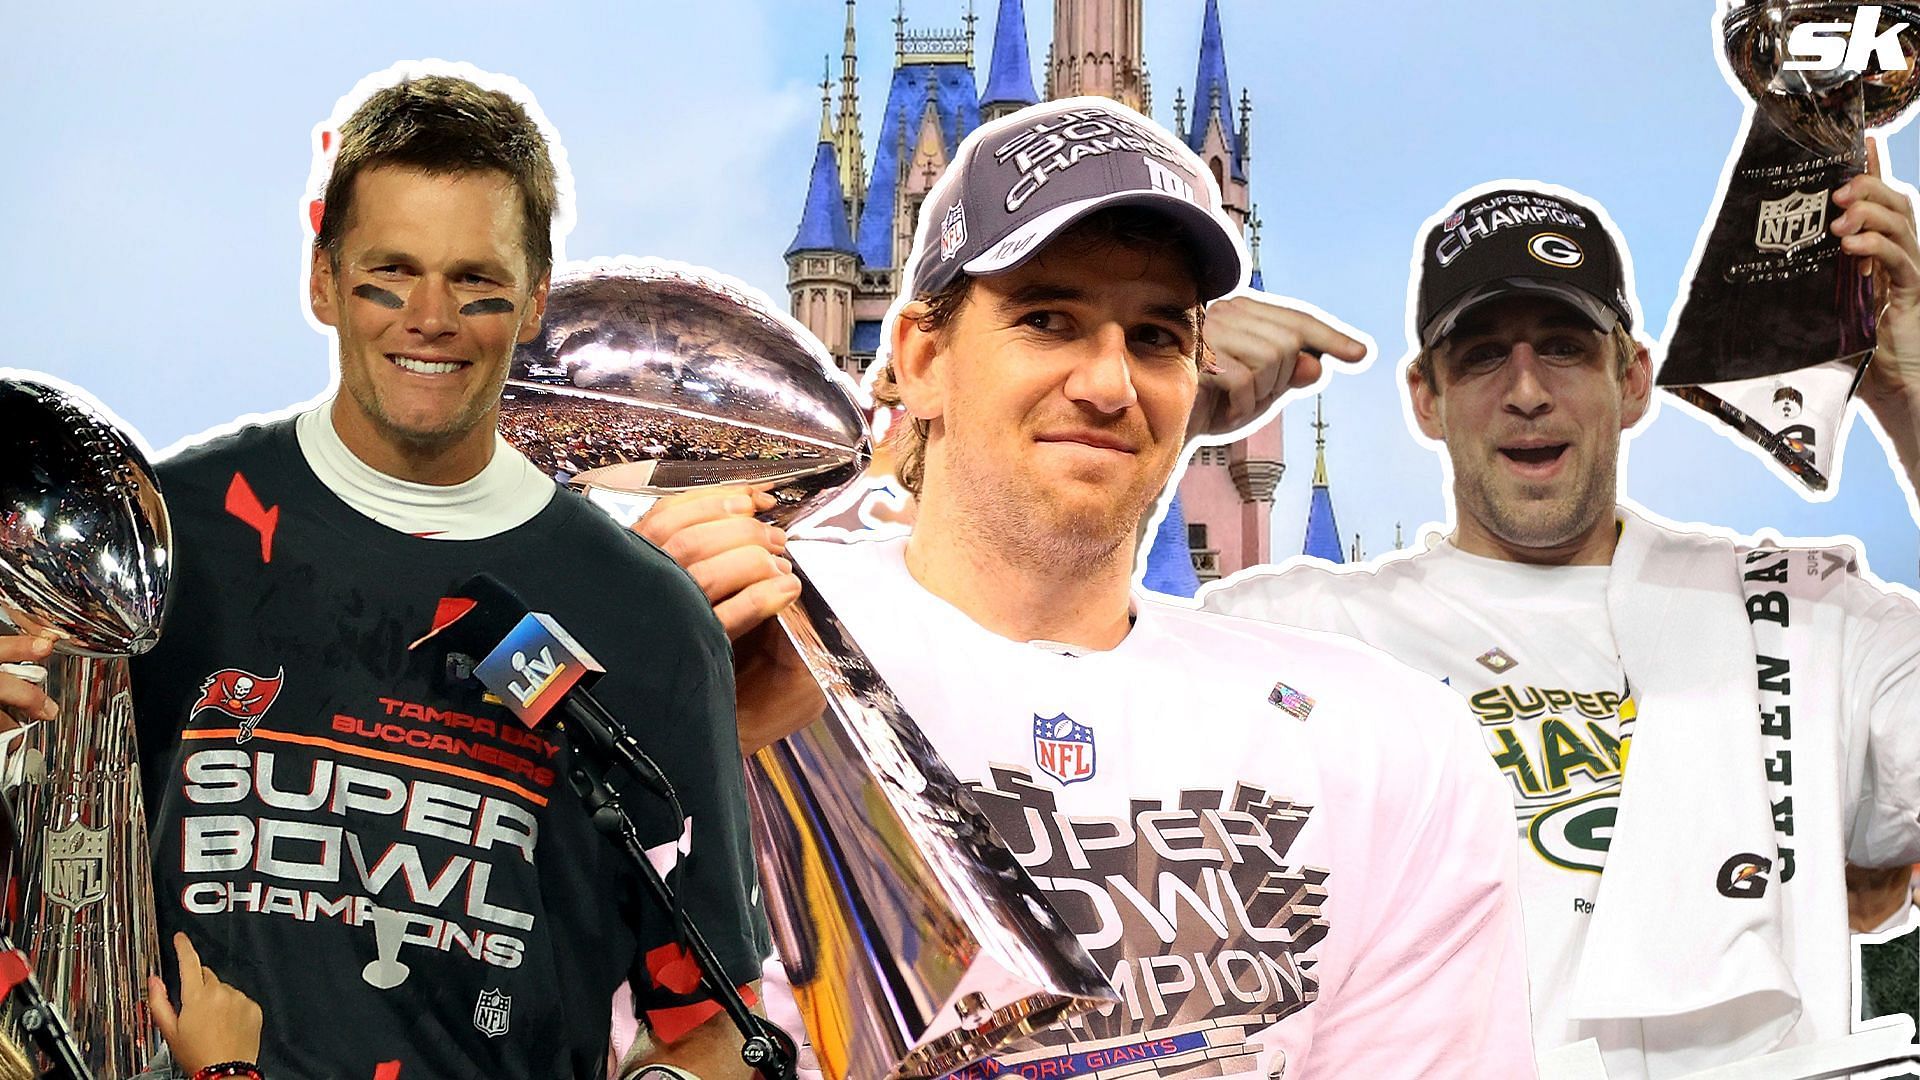 Tom Brady, Eli Manning and Aaron Rodgers have all made a trip to Disney World after Super Bowl success